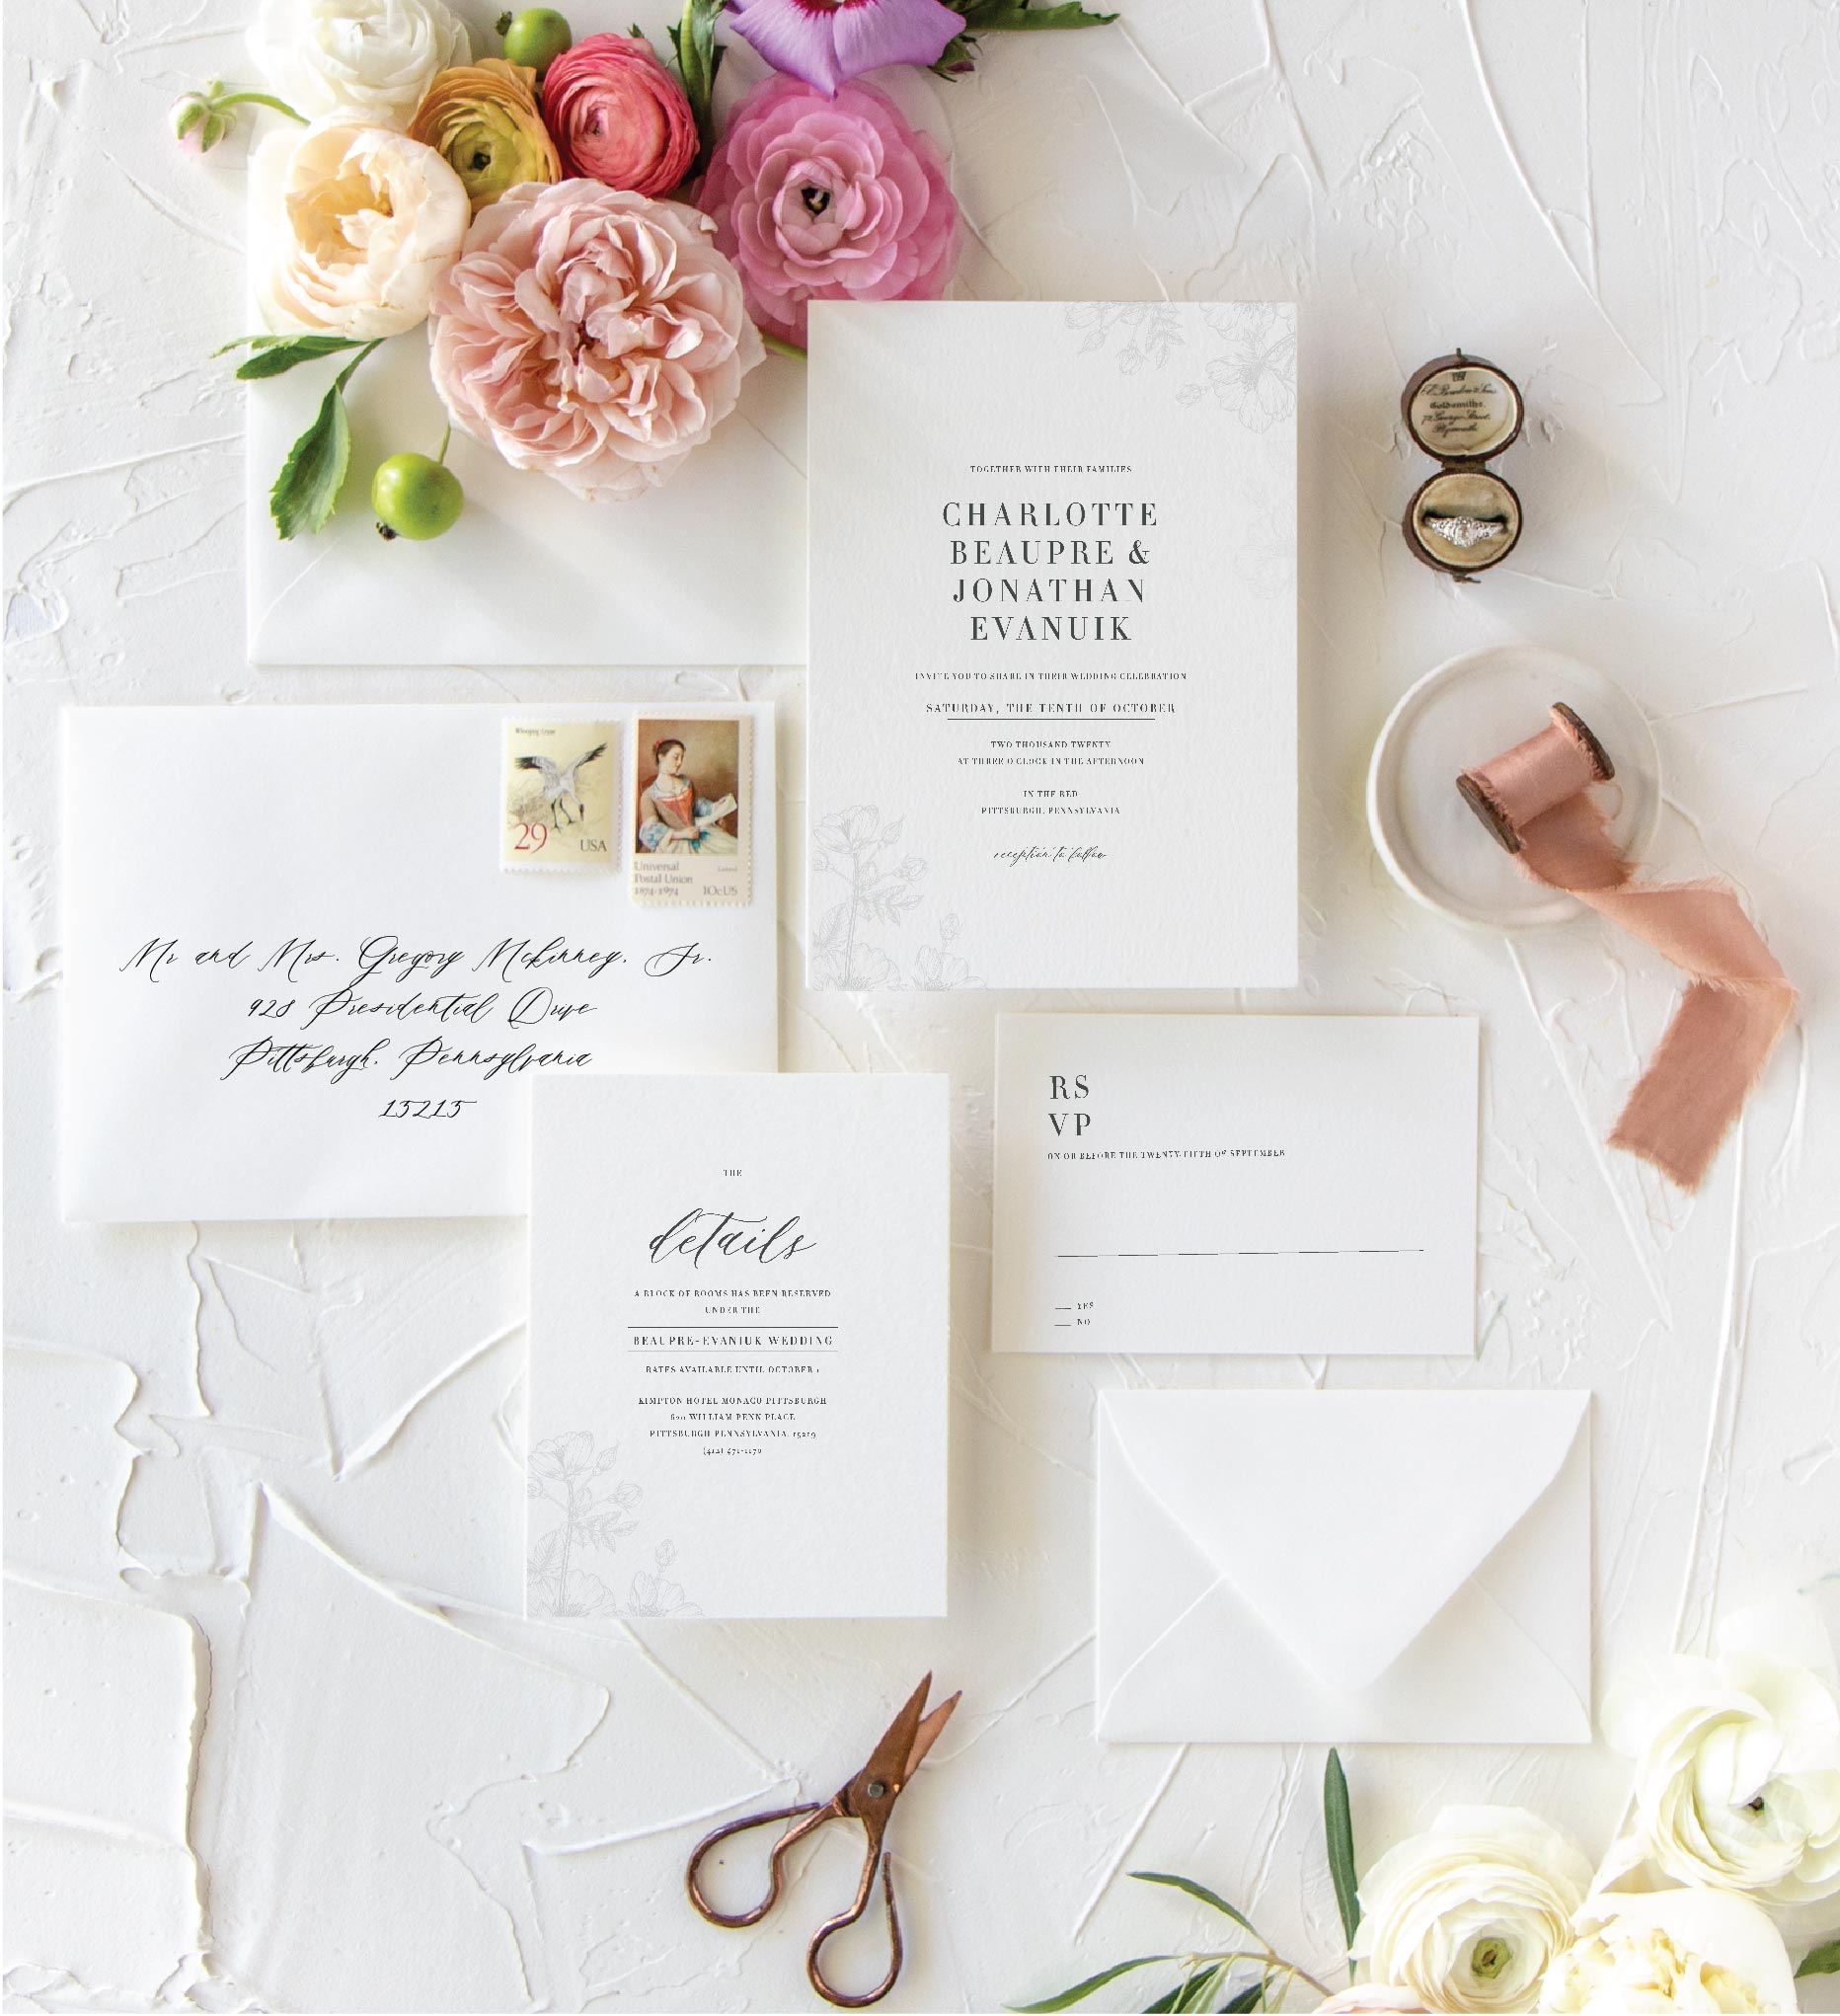 how much should i spend on wedding invitations?